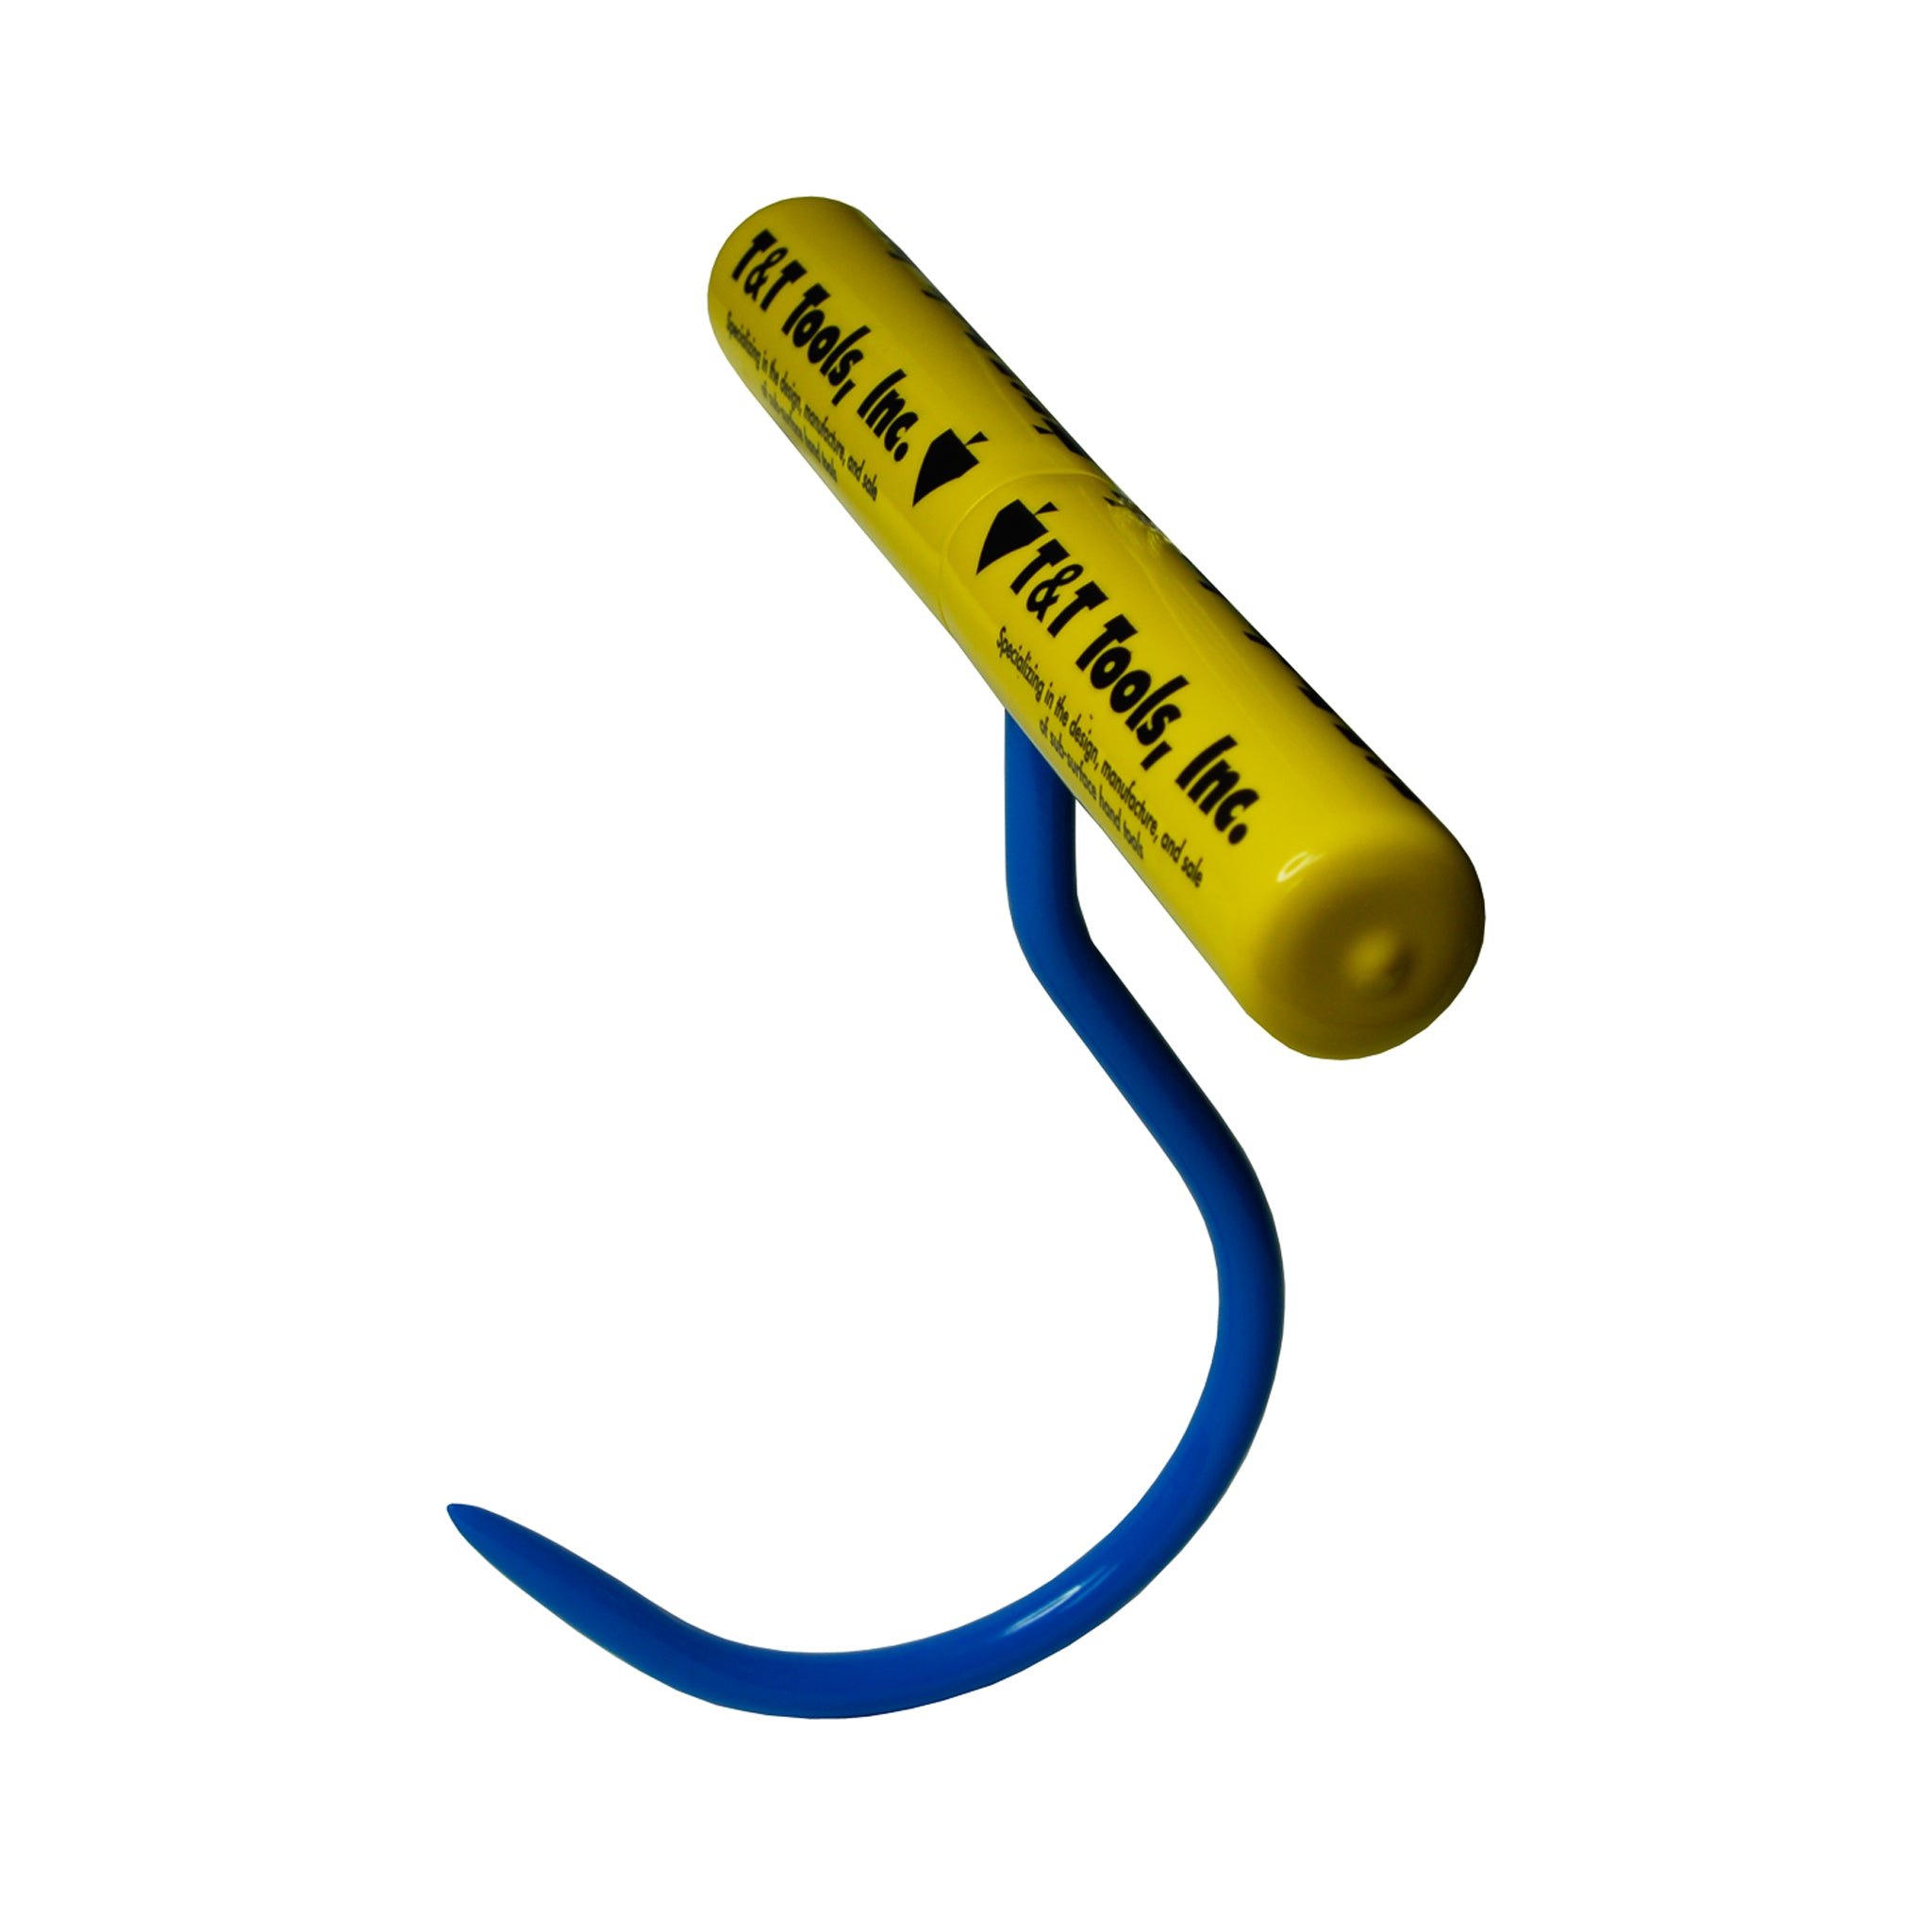 Bale Hook - T&T Tools – MightyProbe - T&T Tools, Inc.